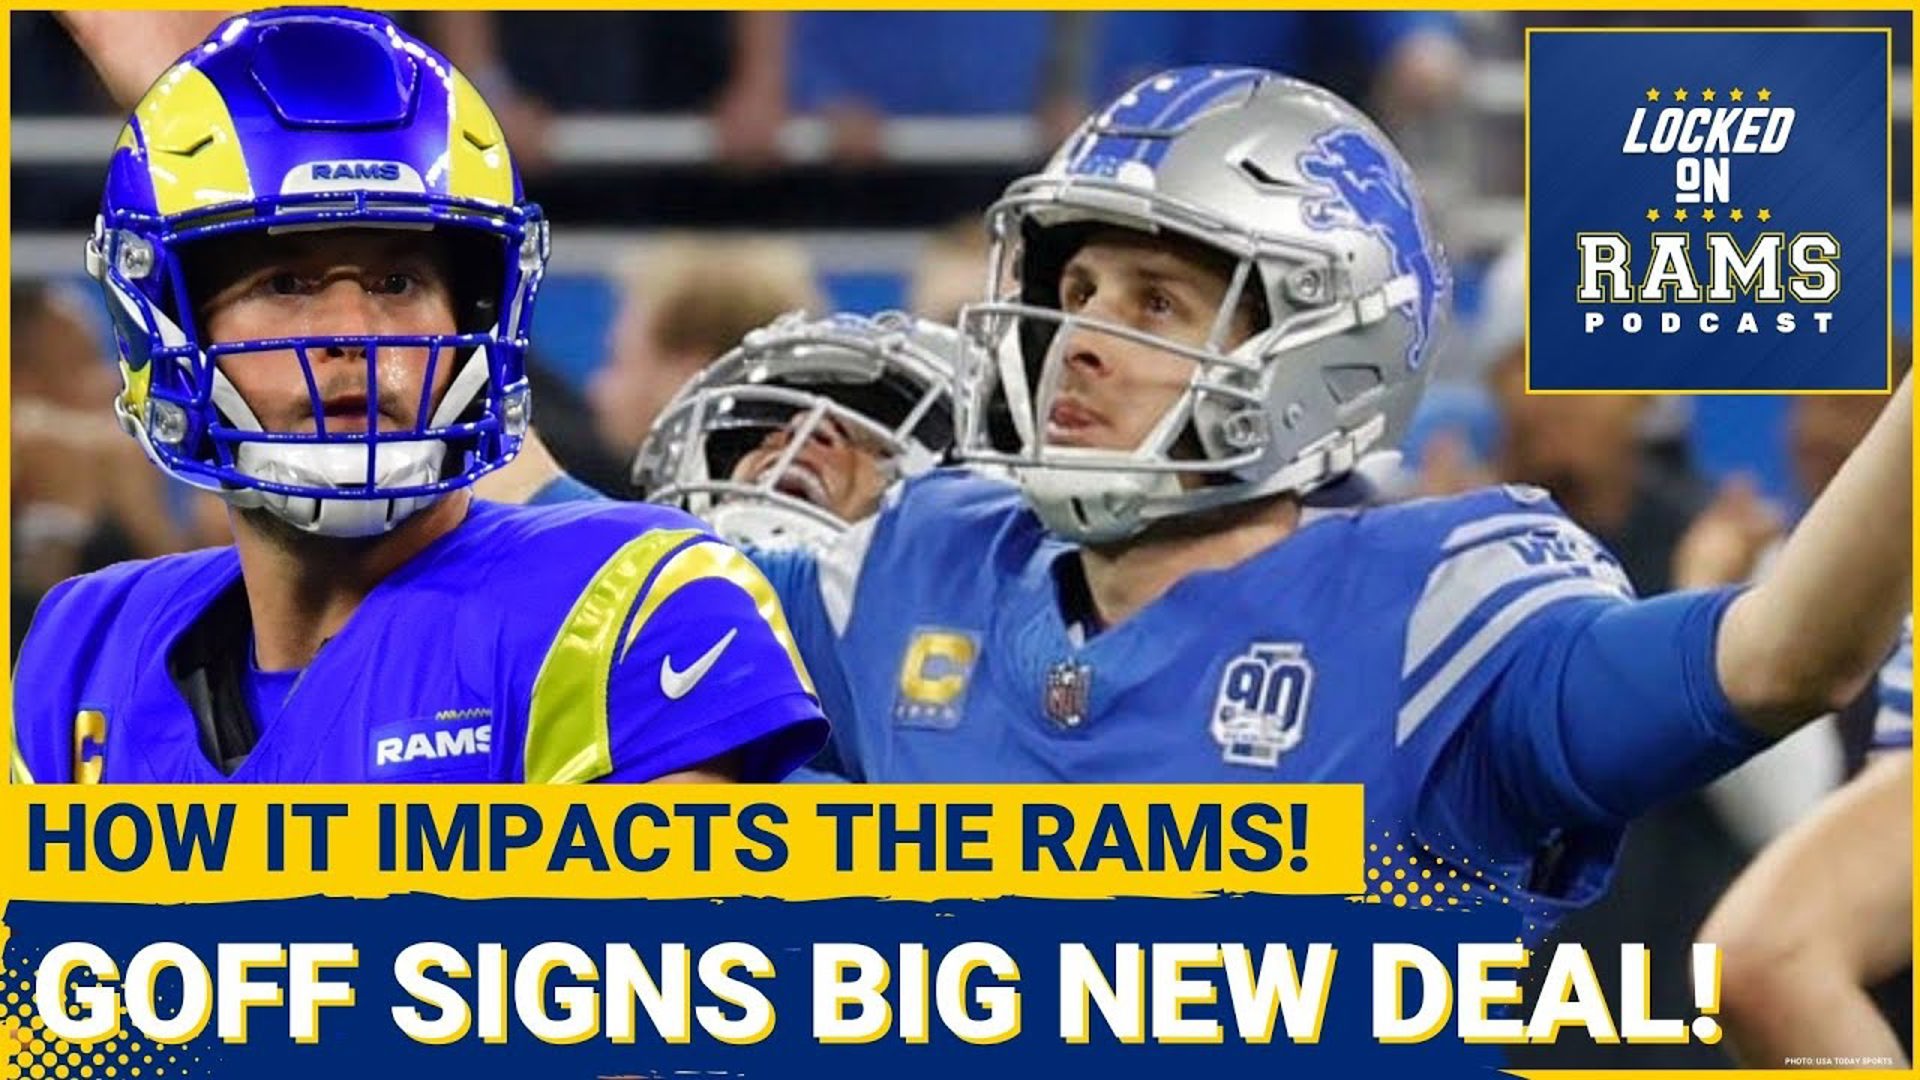 The Detroit Lions signed former Los Angeles Rams quarterback Jared Goff to a massive extension. D-mac and Travis discuss how Goff's new deal impacts the Rams